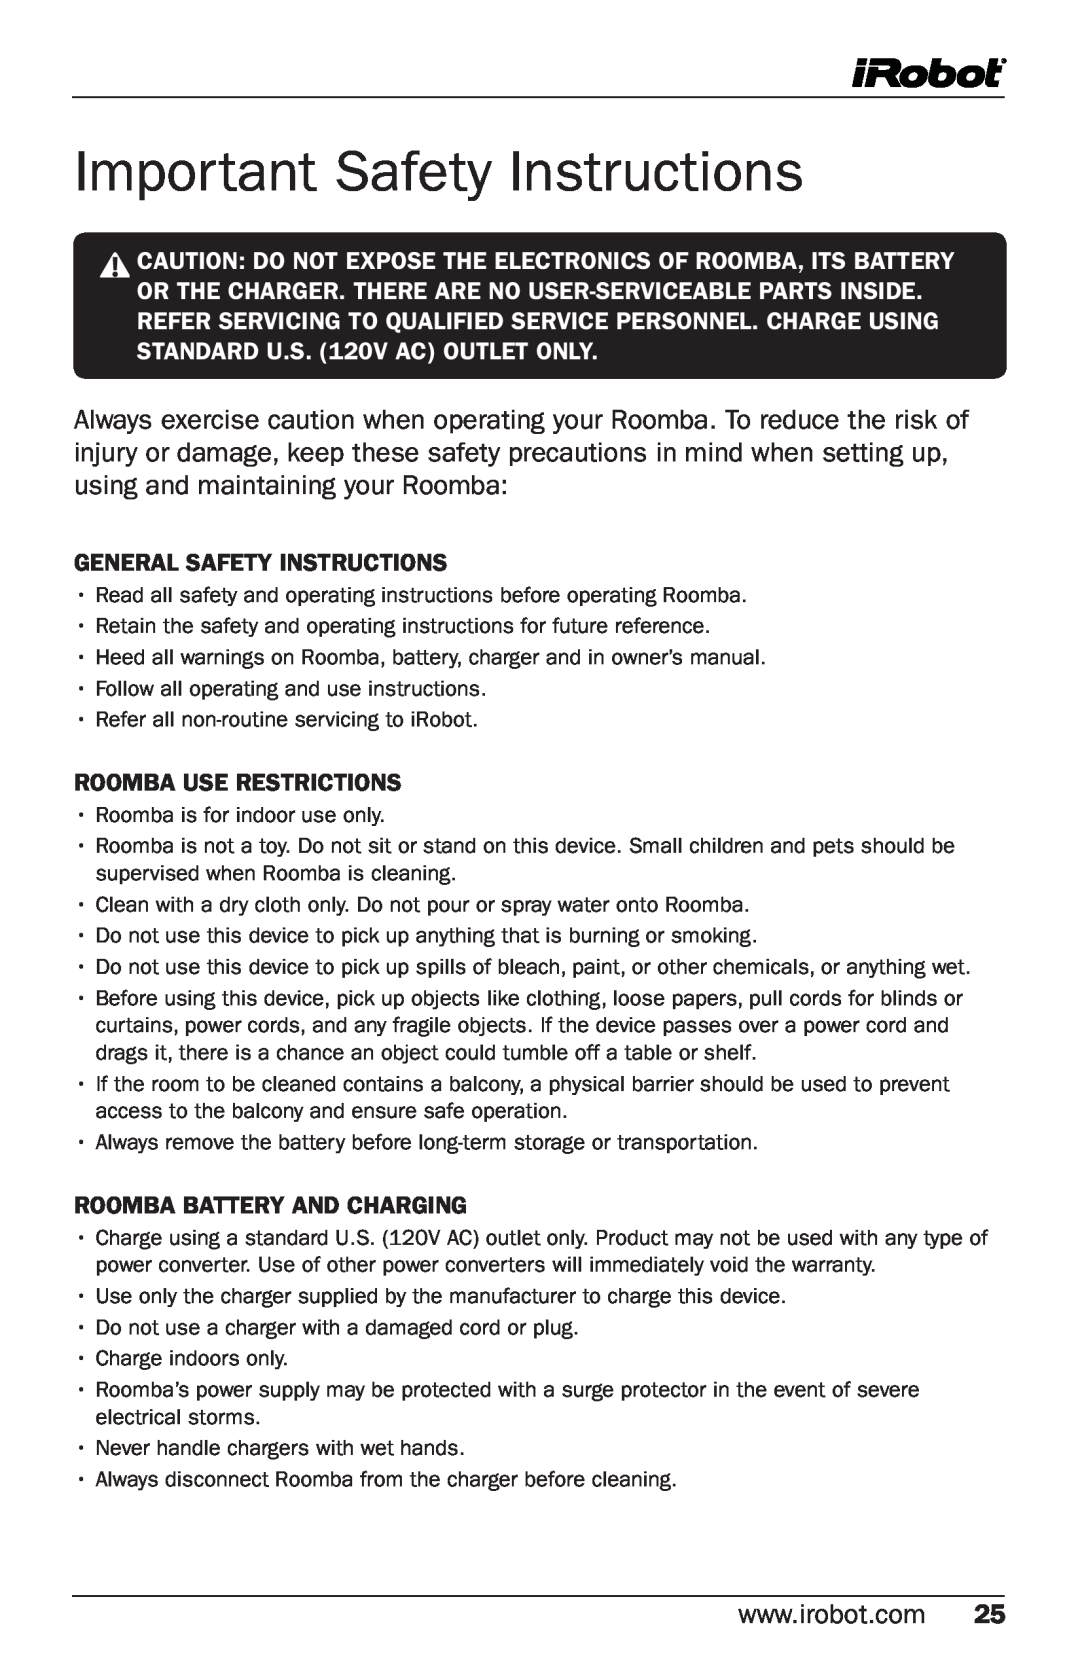 iRobot 500 Series manual Important Safety Instructions, General Safety Instructions, Roomba Use Restrictions 